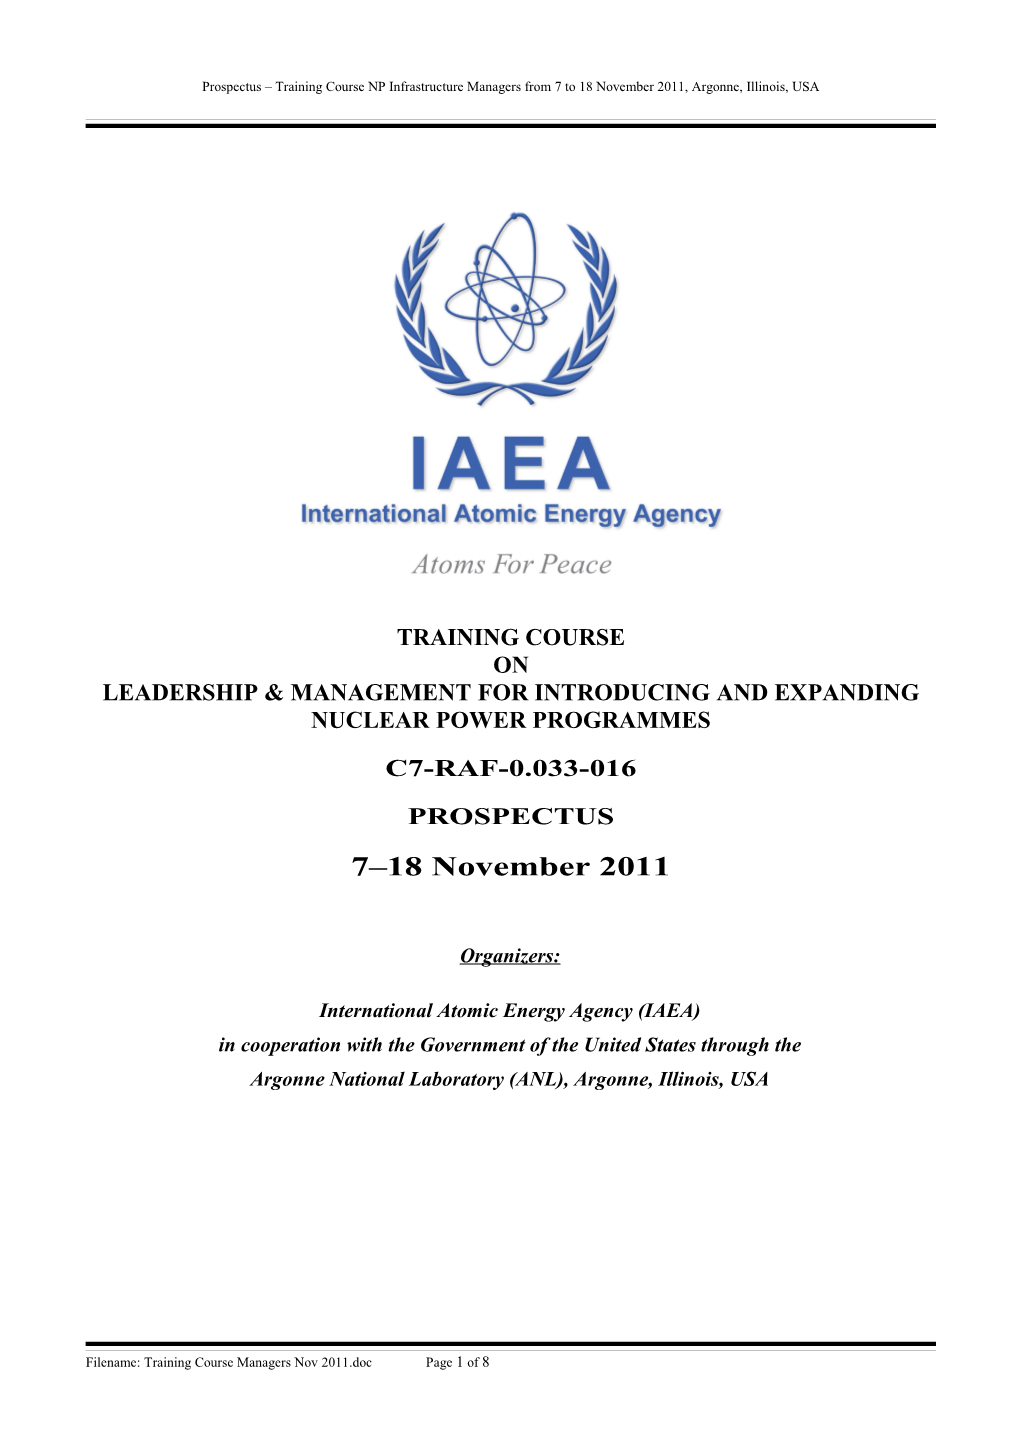 Leadership & Management for Introducing and Expanding Nuclear Power Programmes